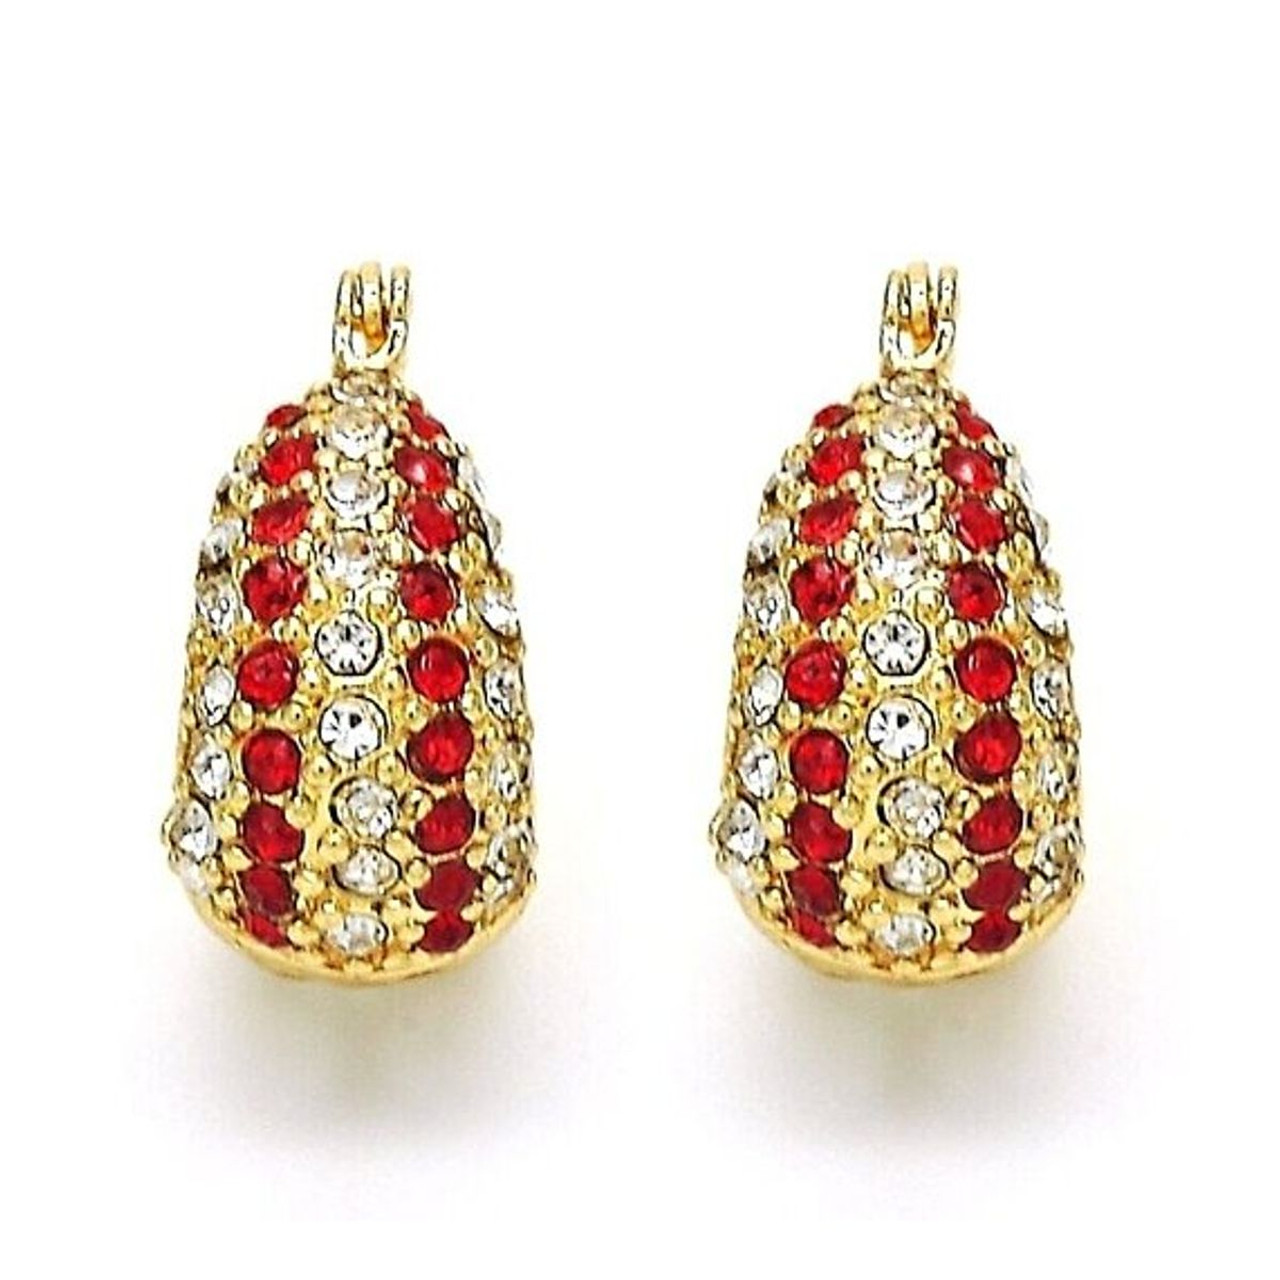 18K Gold-Filled High-Polish Red & White Crystal Earrings product image